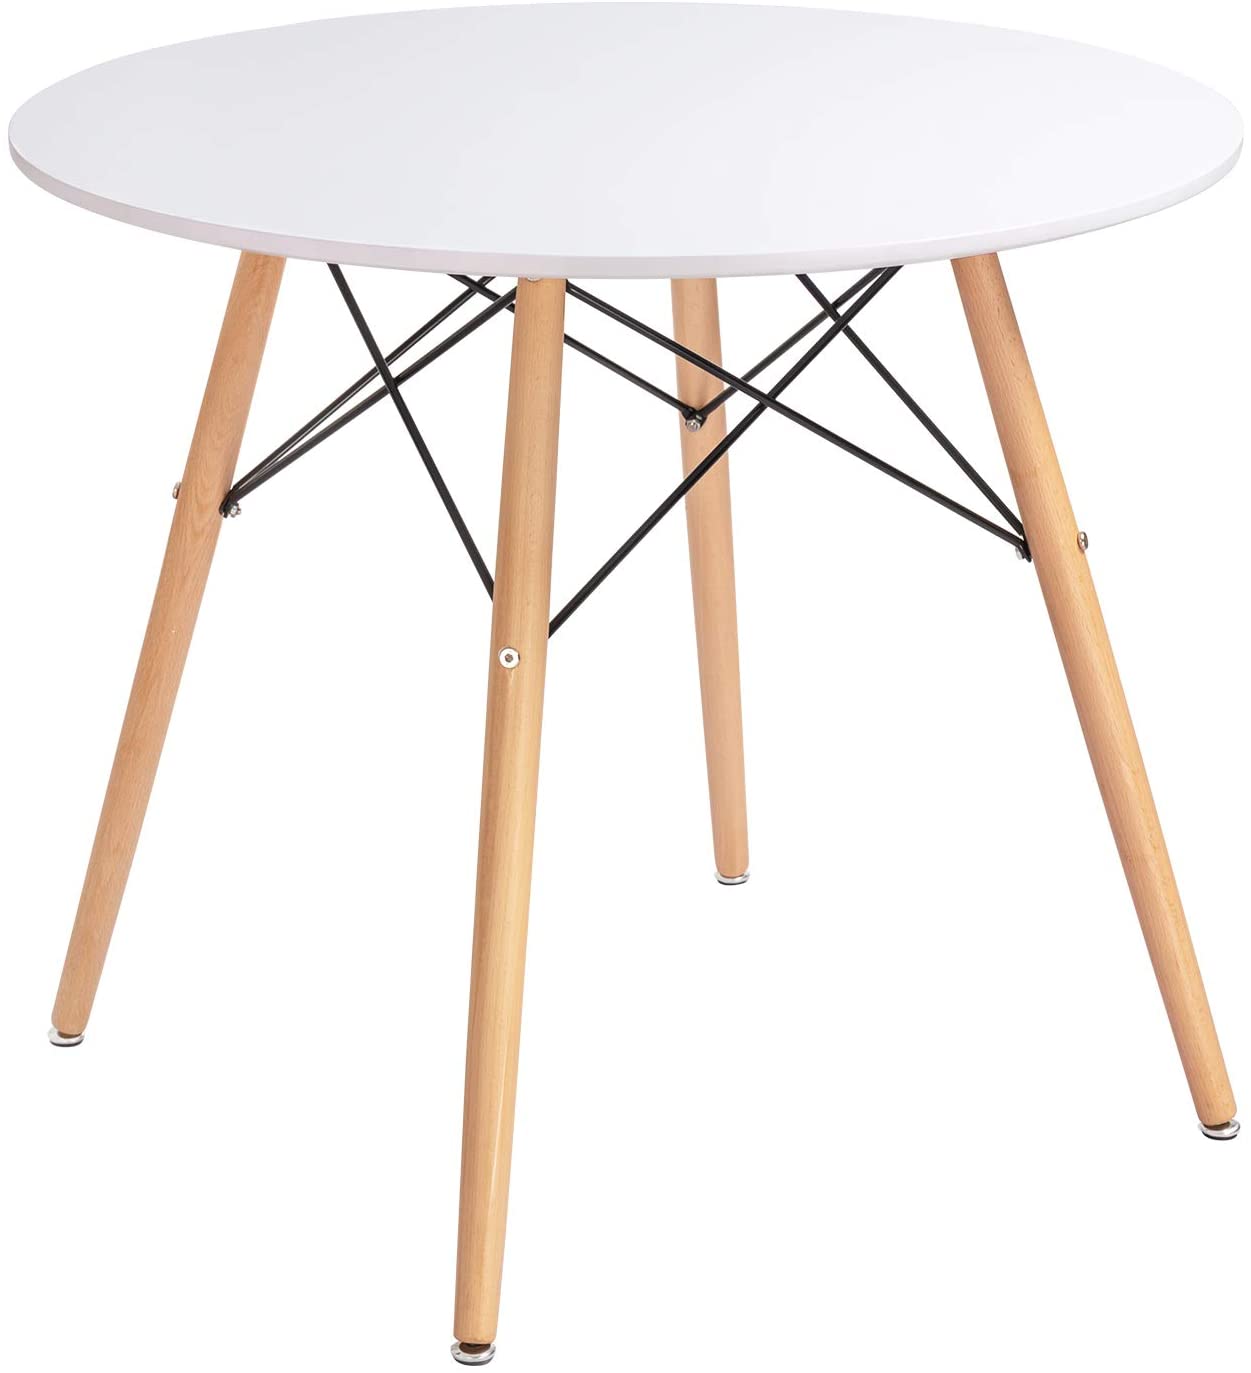 B0867L3FNT GUNJI Dining Table Modern Pedestal Round Kitchen Table Leisure Style Tea Coffee Dining Room Table with Wood Legs (White)